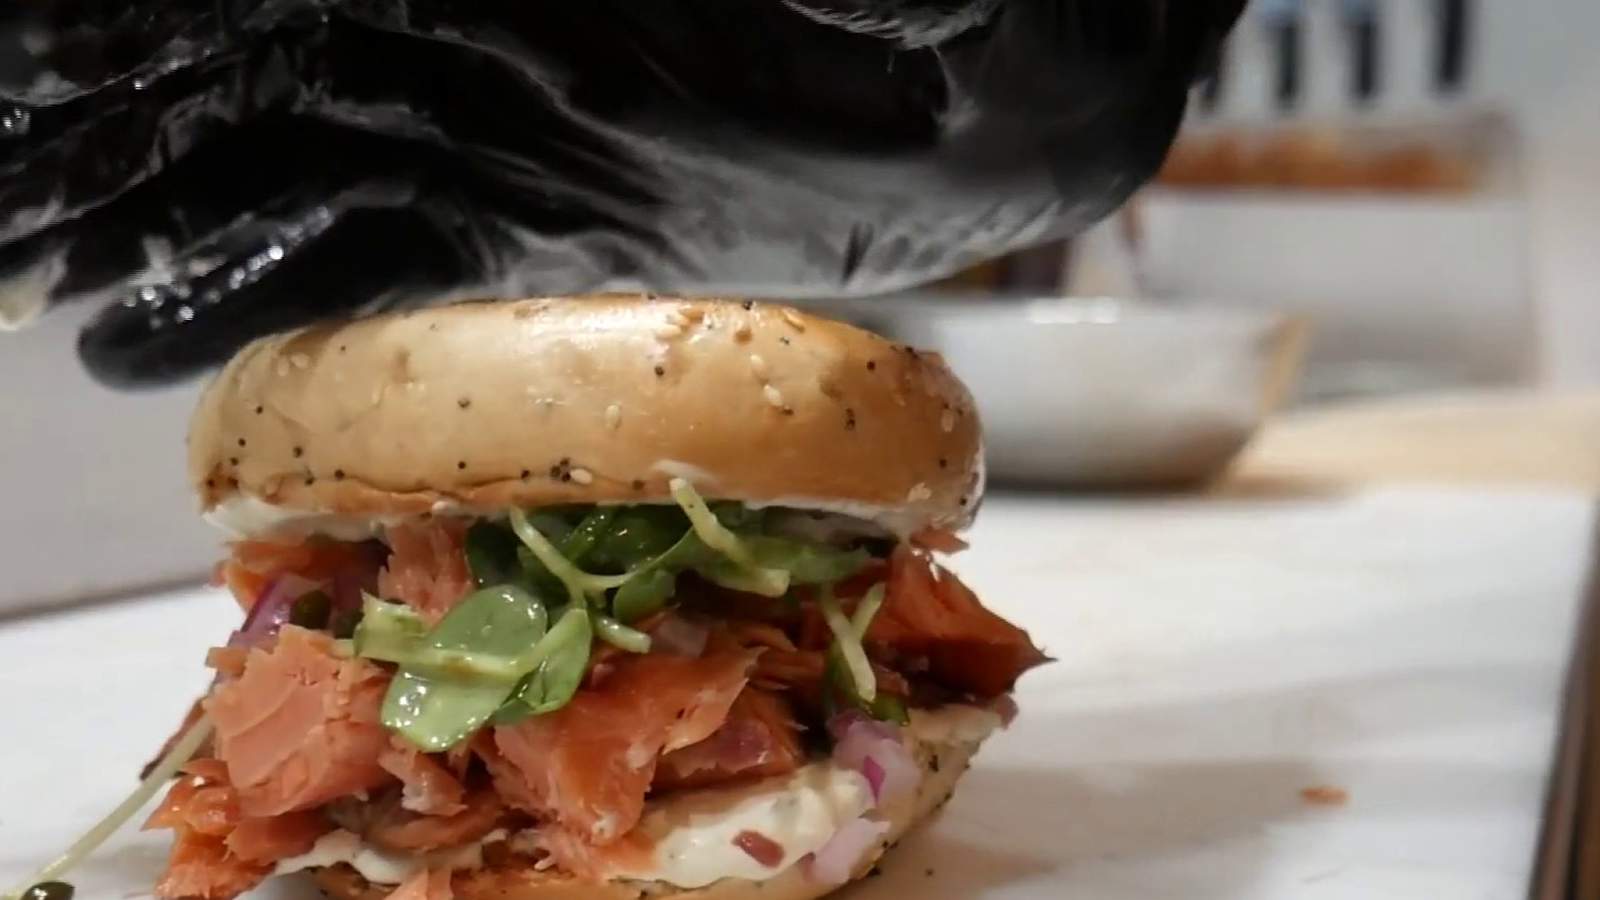 TASTY TUESDAY: Clutch Smoked Meats offers something different in the Star City